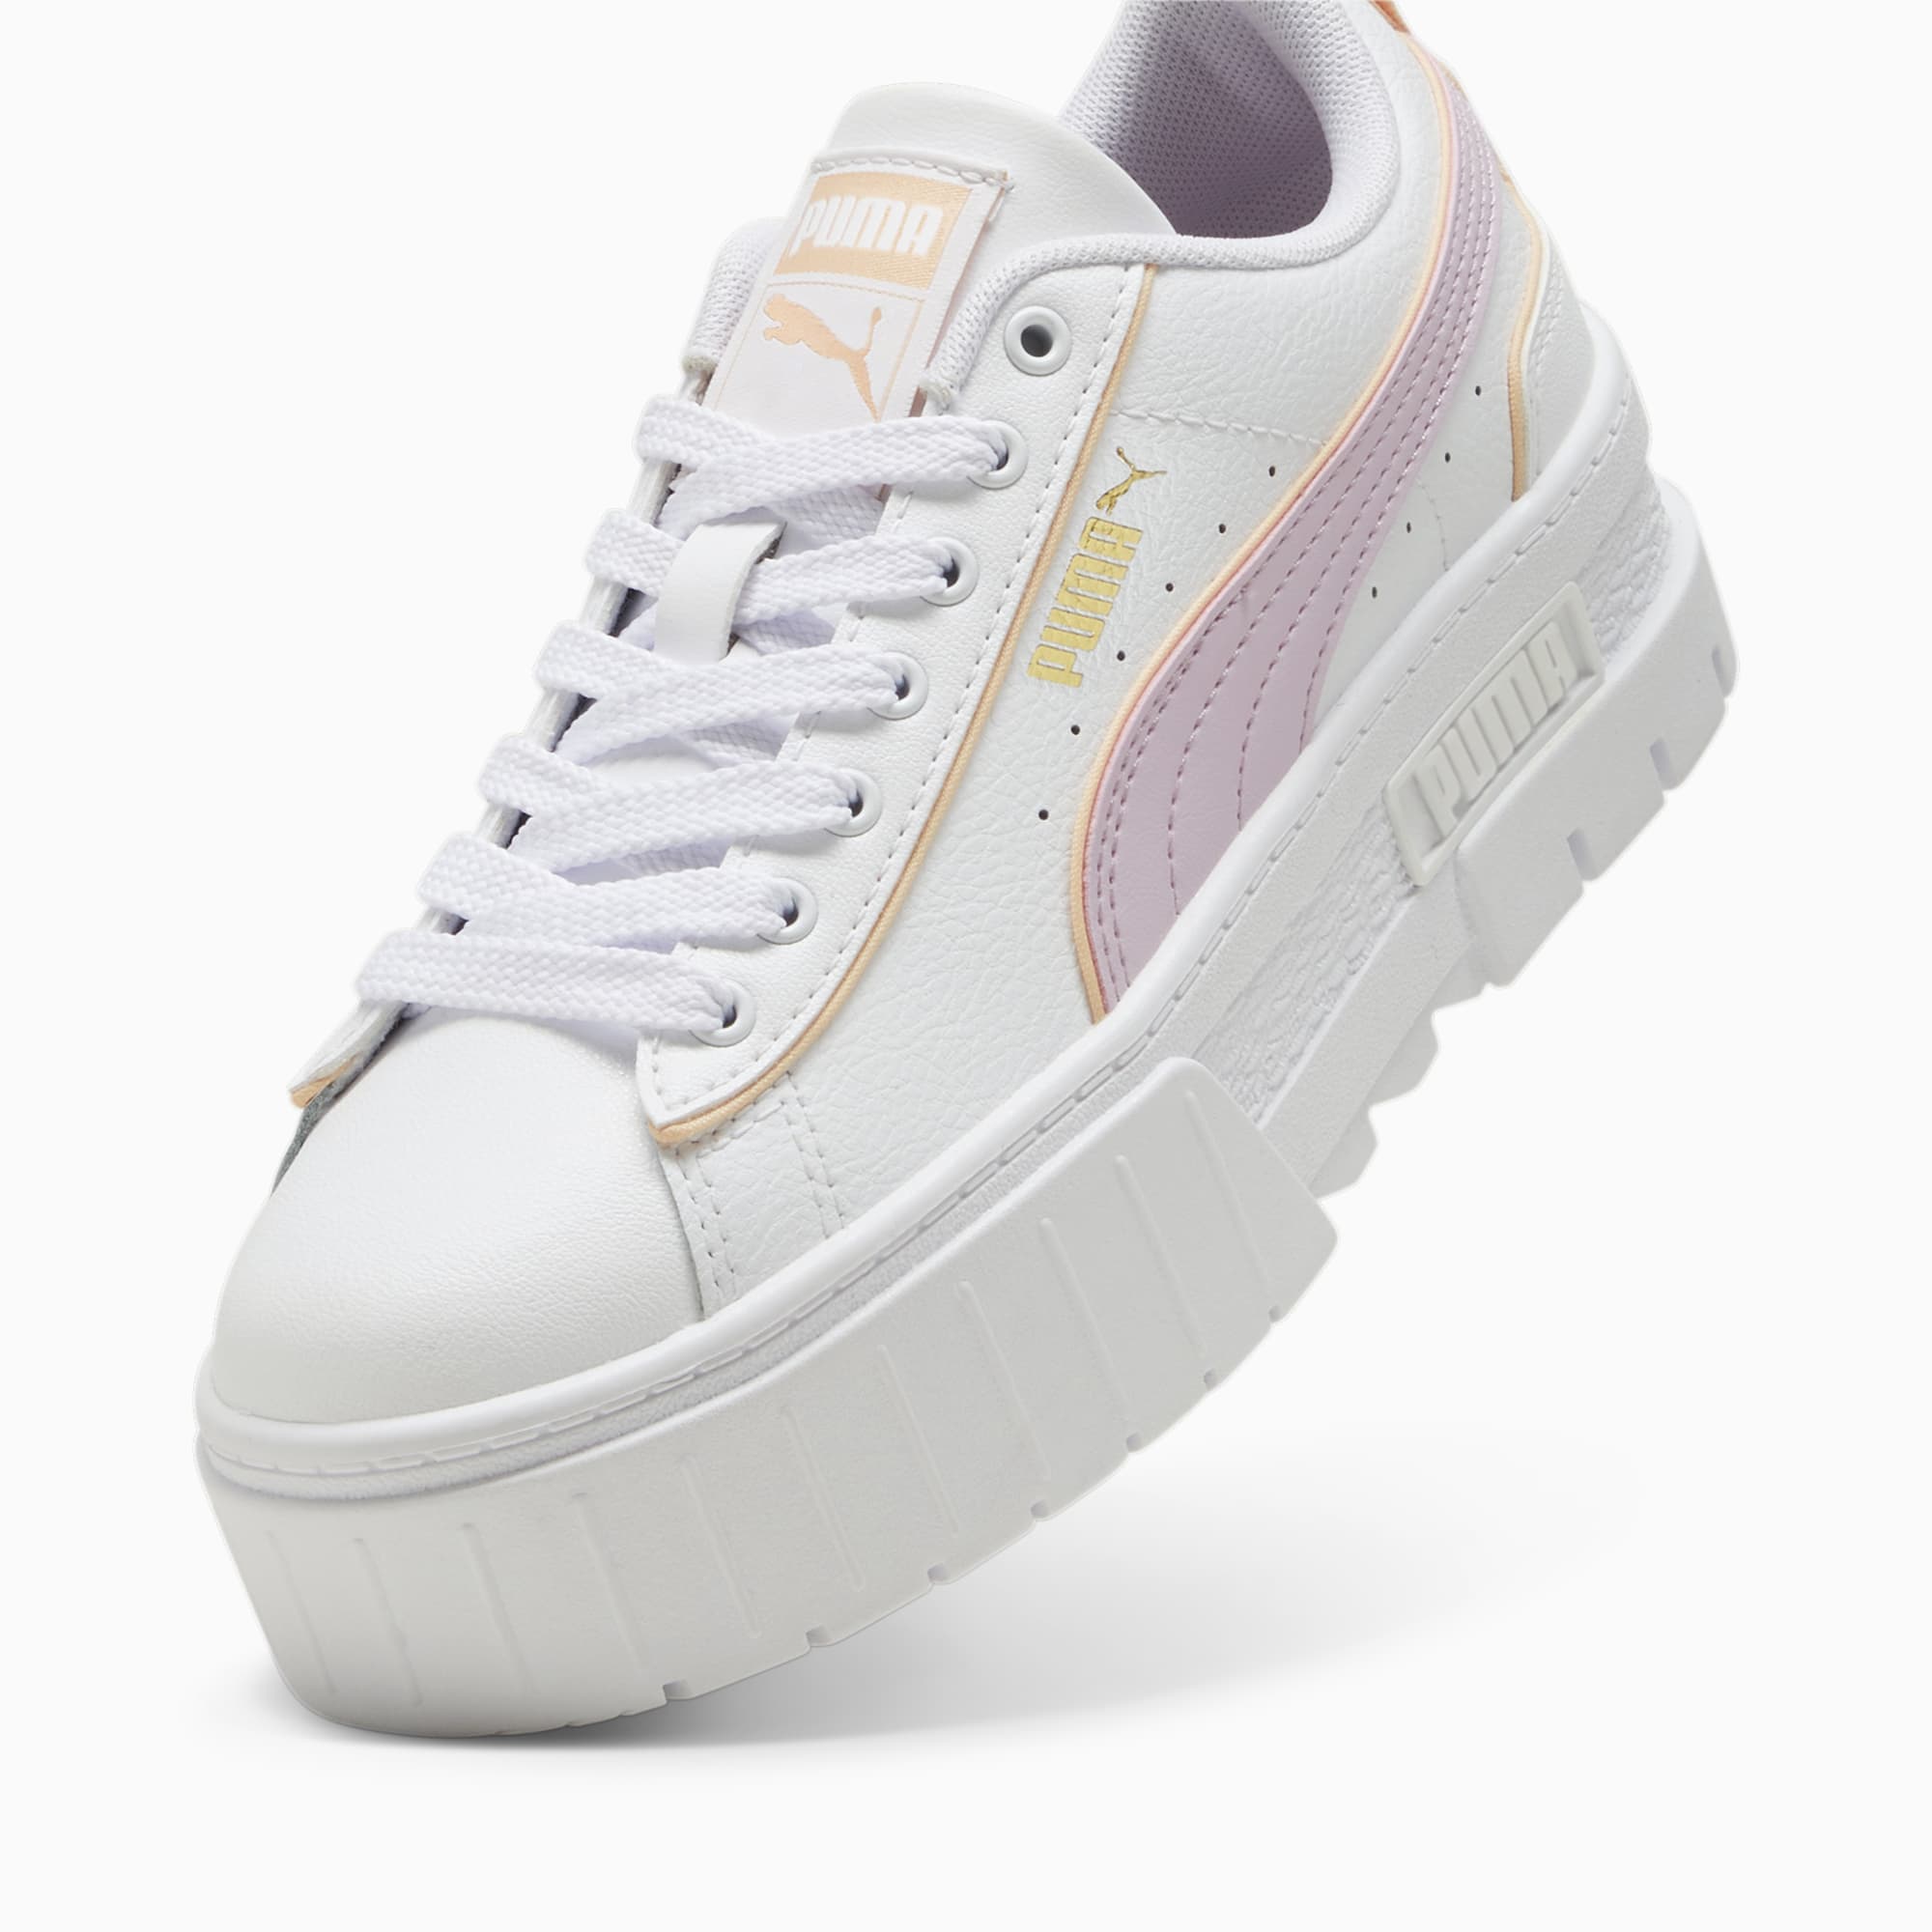 PUMA Mayze Leather Piping Sneakers, Paars/Roze/Wit